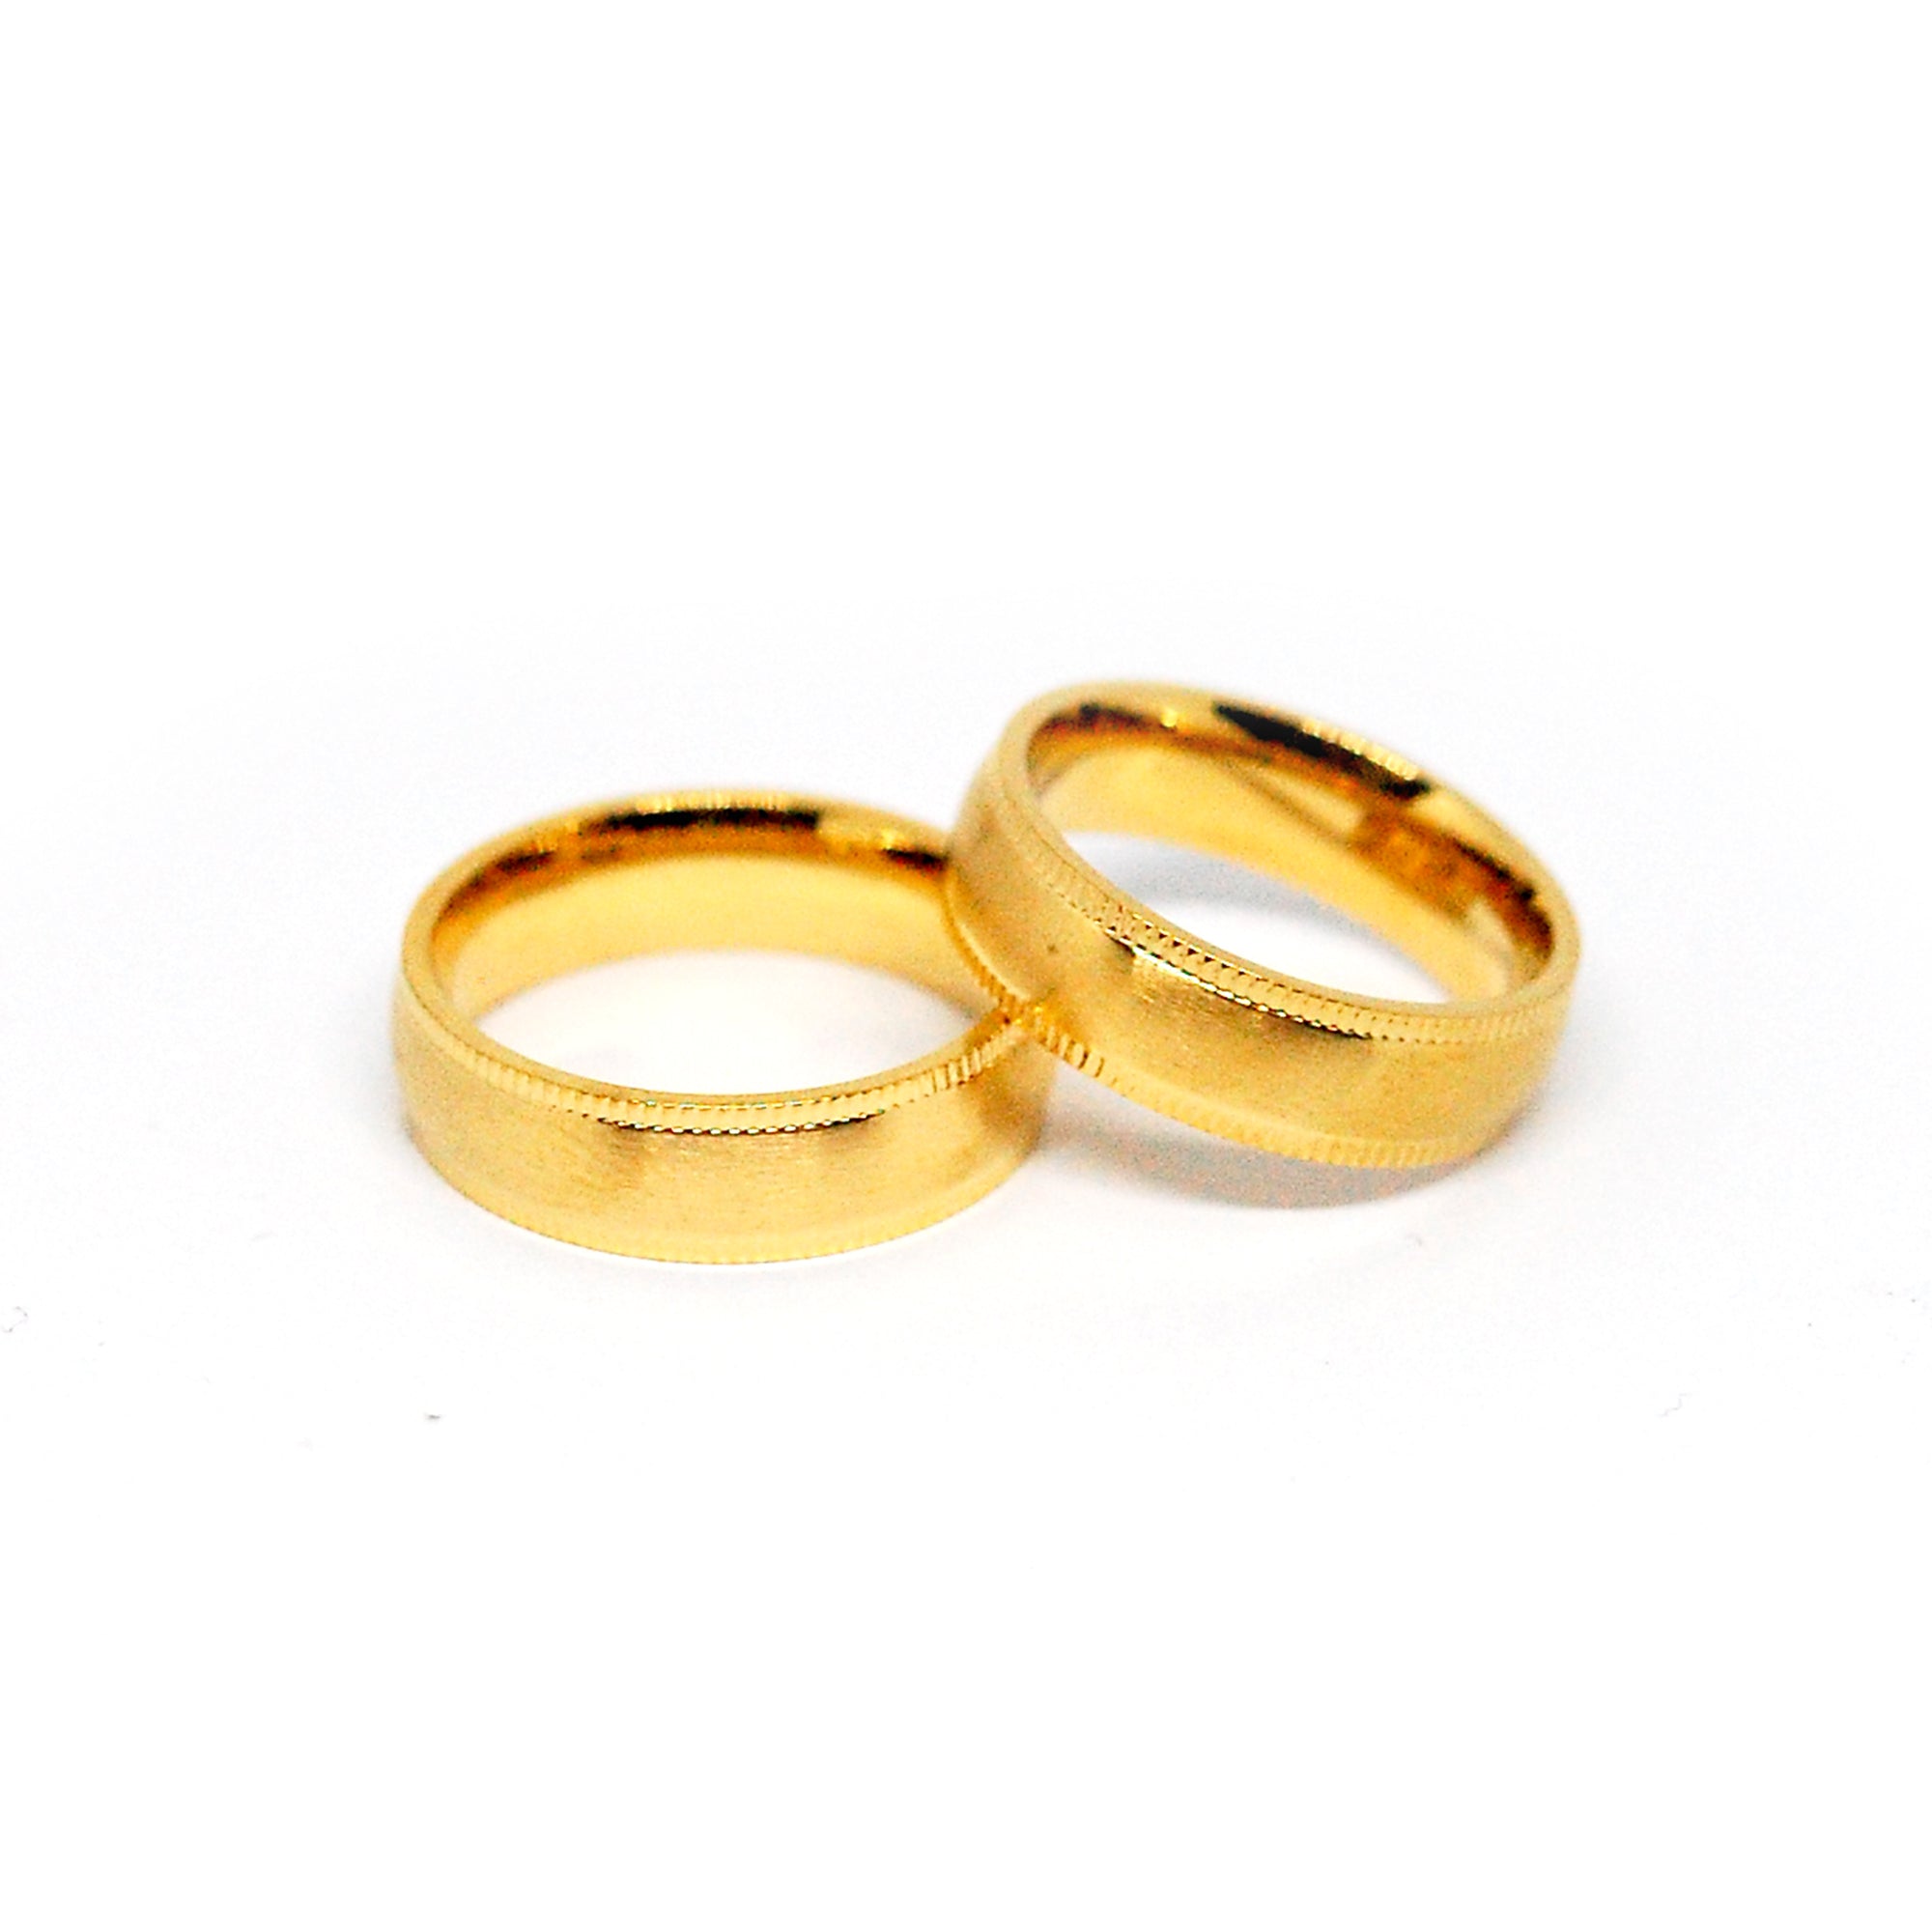 ESR 7538: Kylie All Gold-Plated 6mm Satin Ring w/ Etched Edges